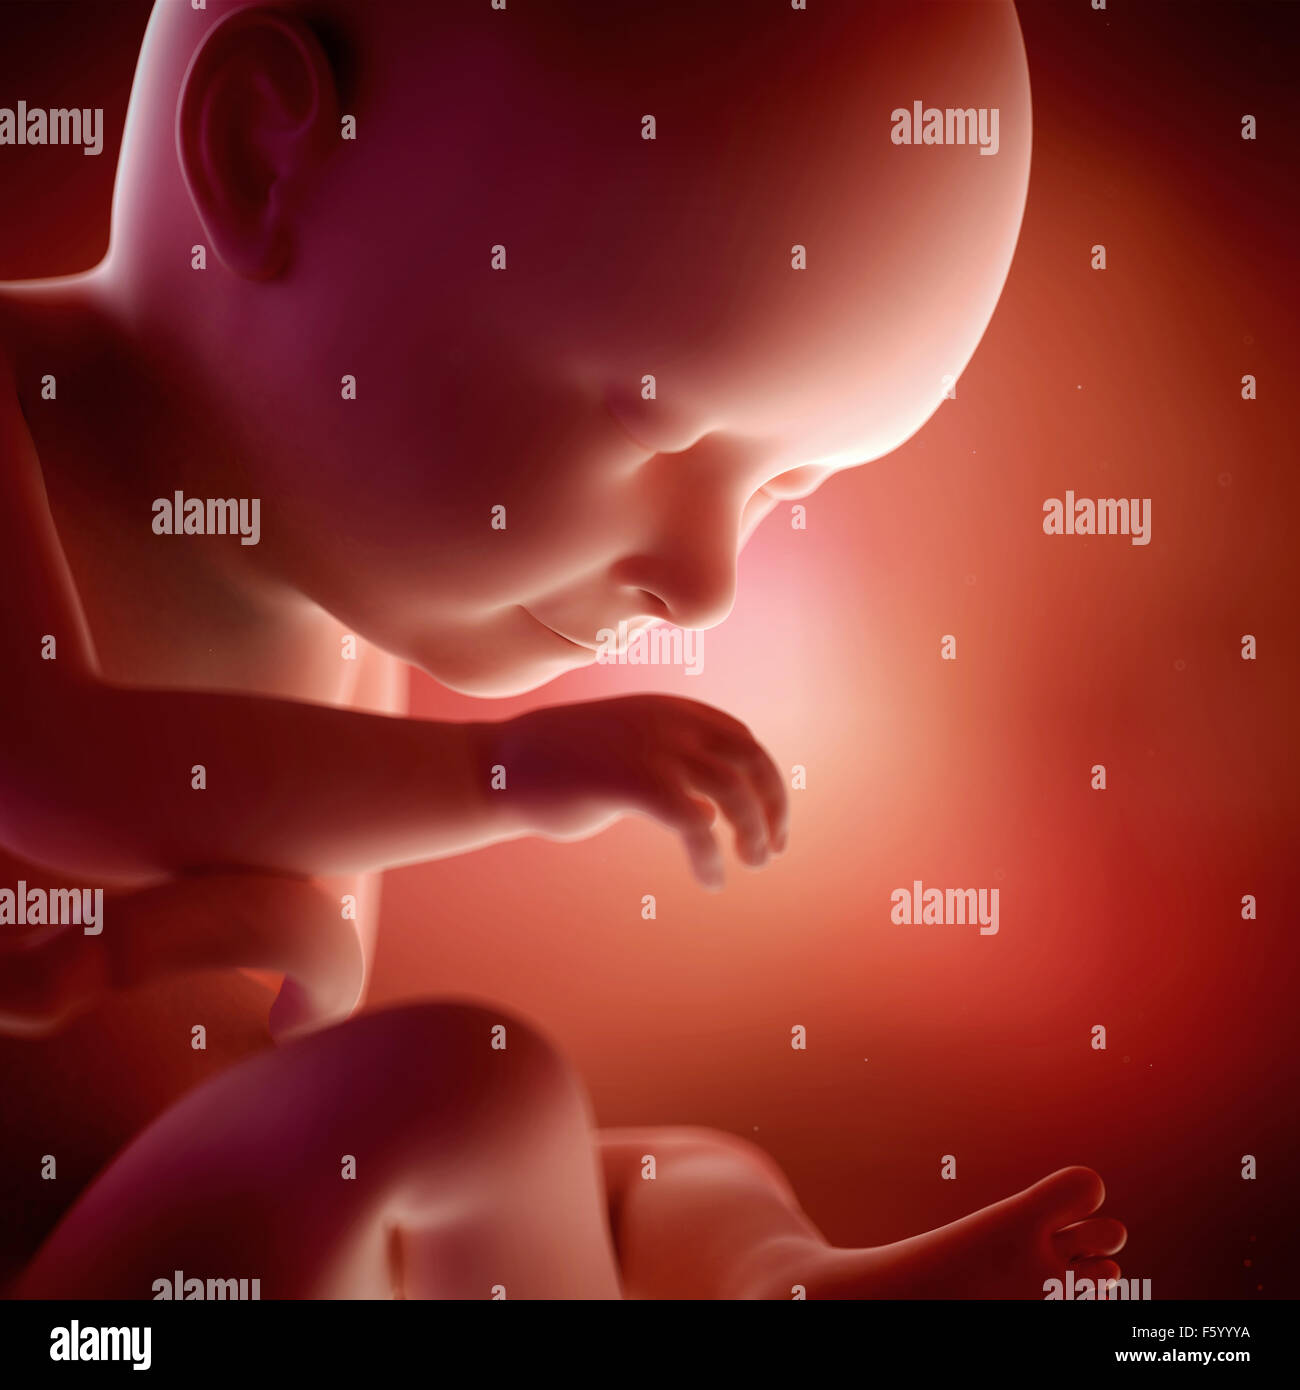 medical accurate 3d illustration of a fetus week 37 Stock Photo